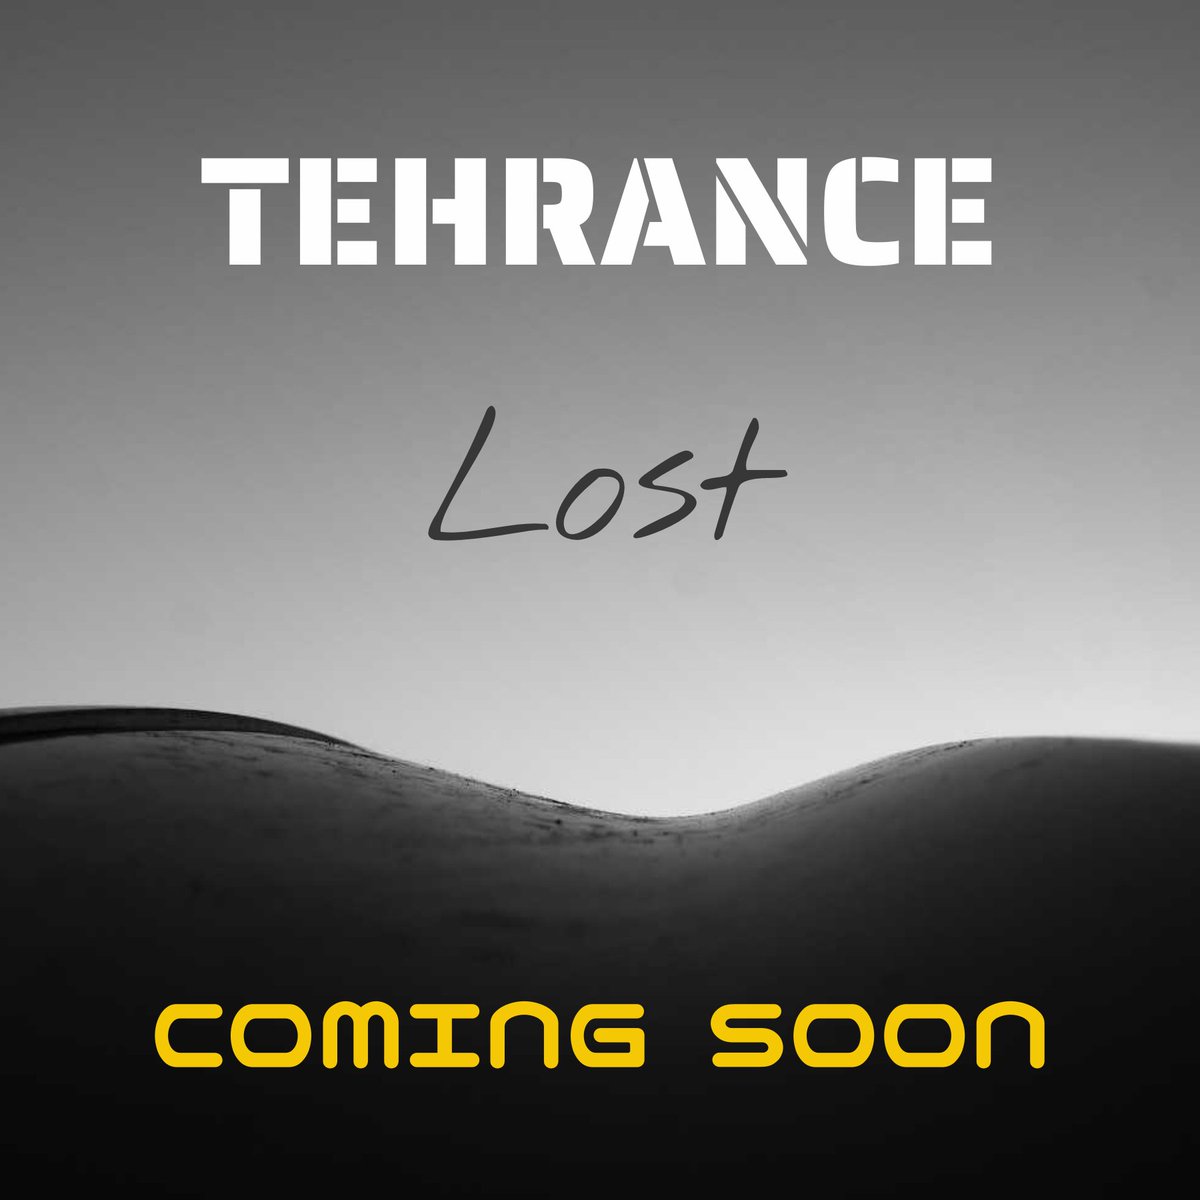 My new music called Lost will be released soon 💥 #tehrancemusic #tehrance #trance #electronicmusic #electronic #music #spotify #applemusic #apple_music #dj #lost #lost_music #lostmusic #disco #club #house #dance